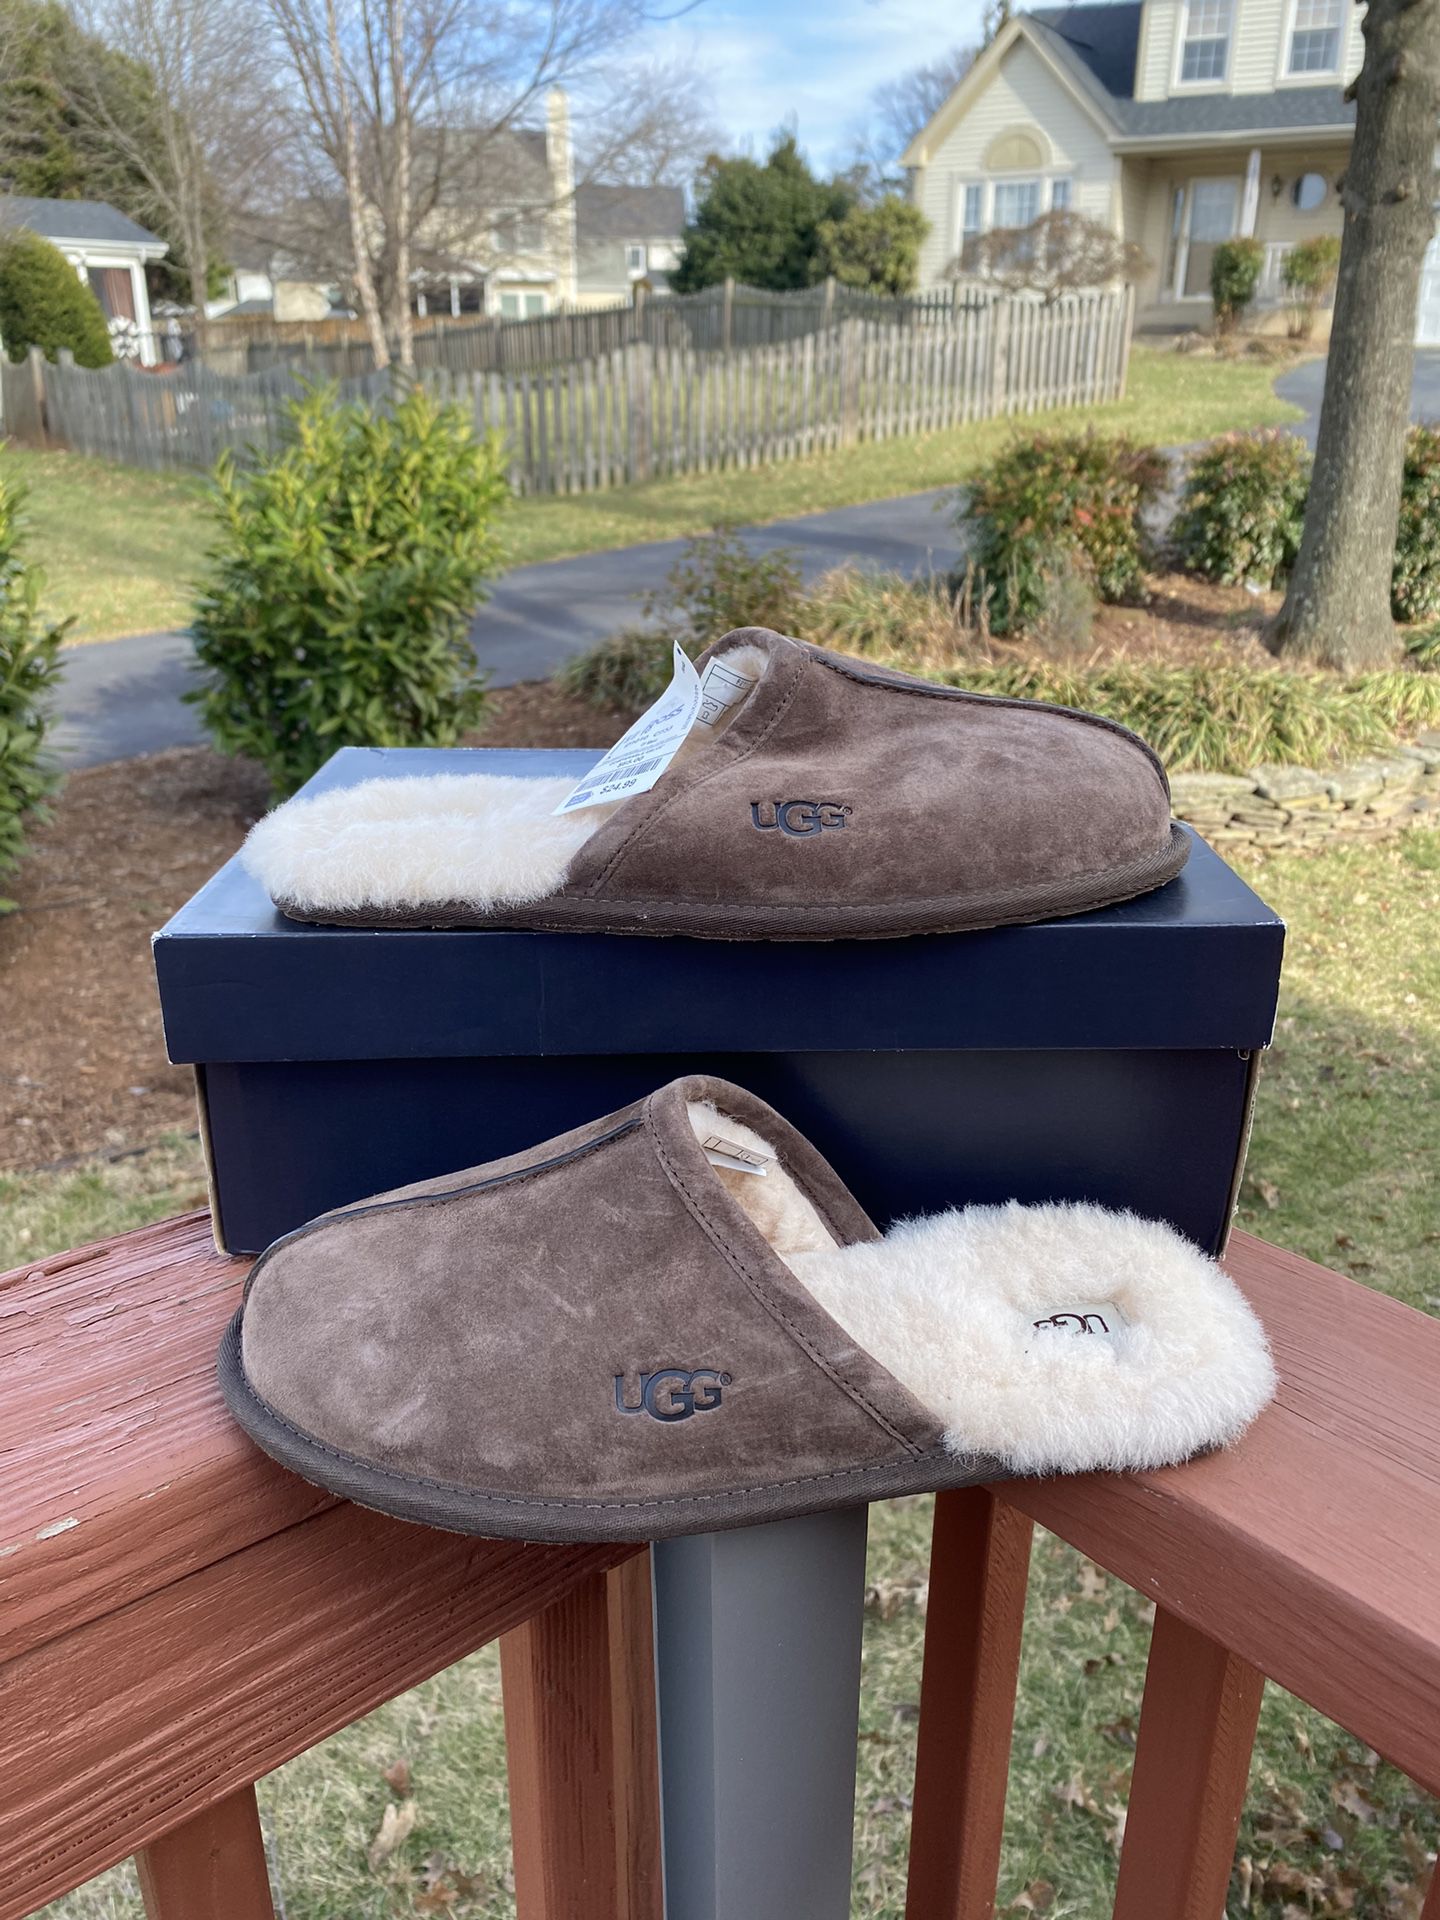 Ugg Slippers Size 10 Women’s 